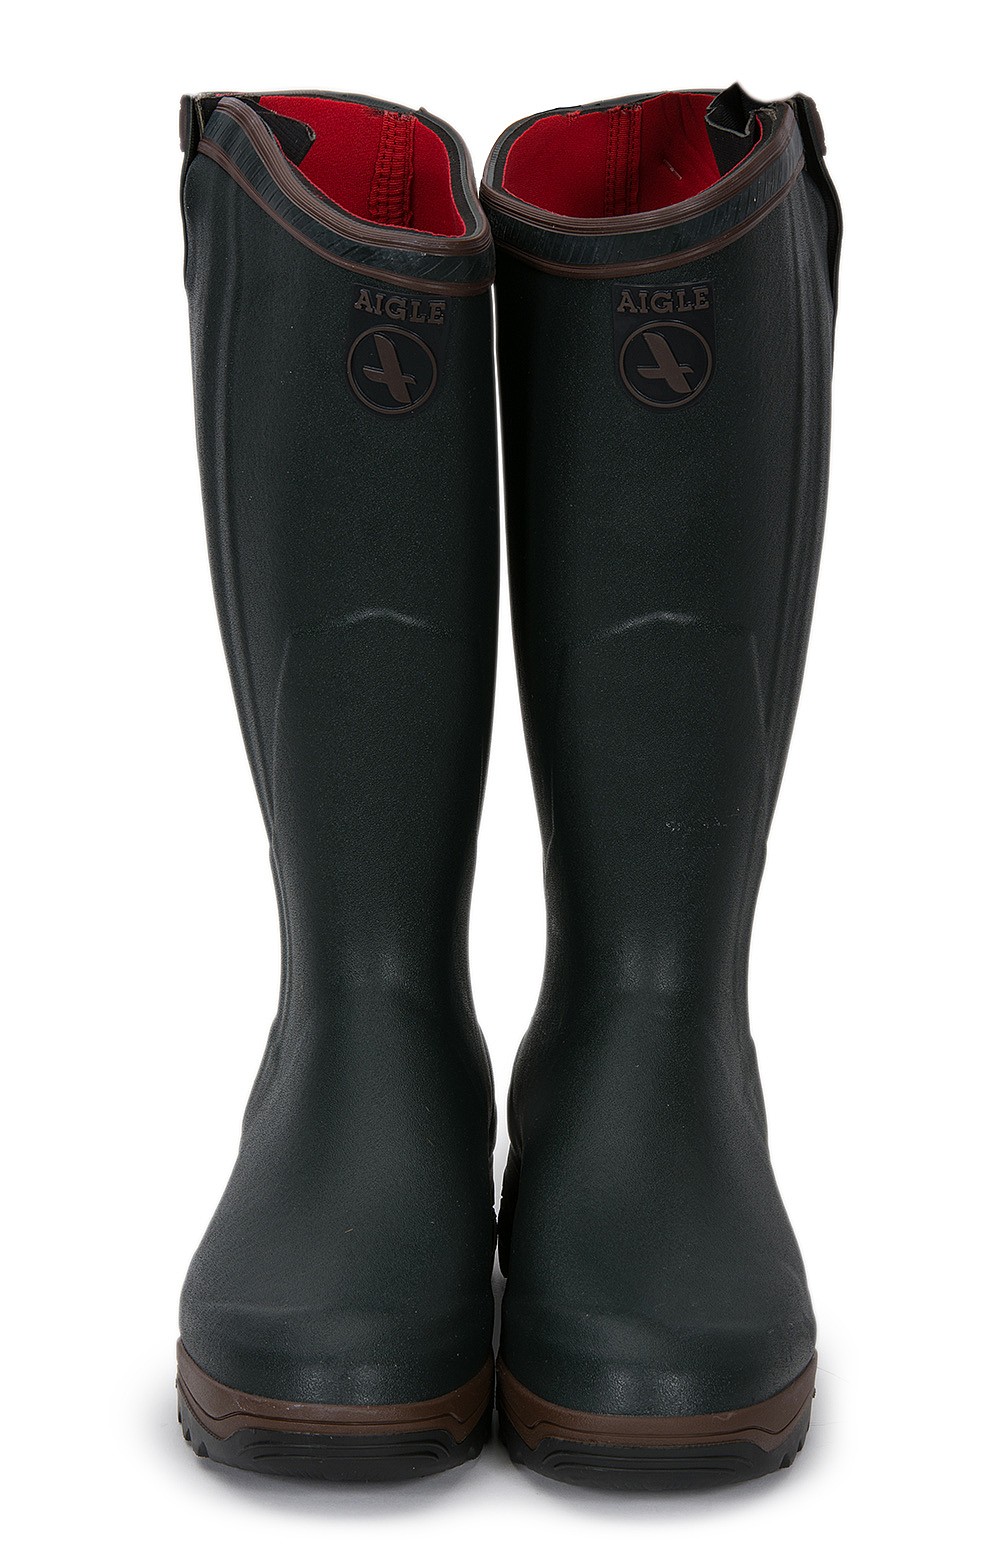 mens wellies with zips